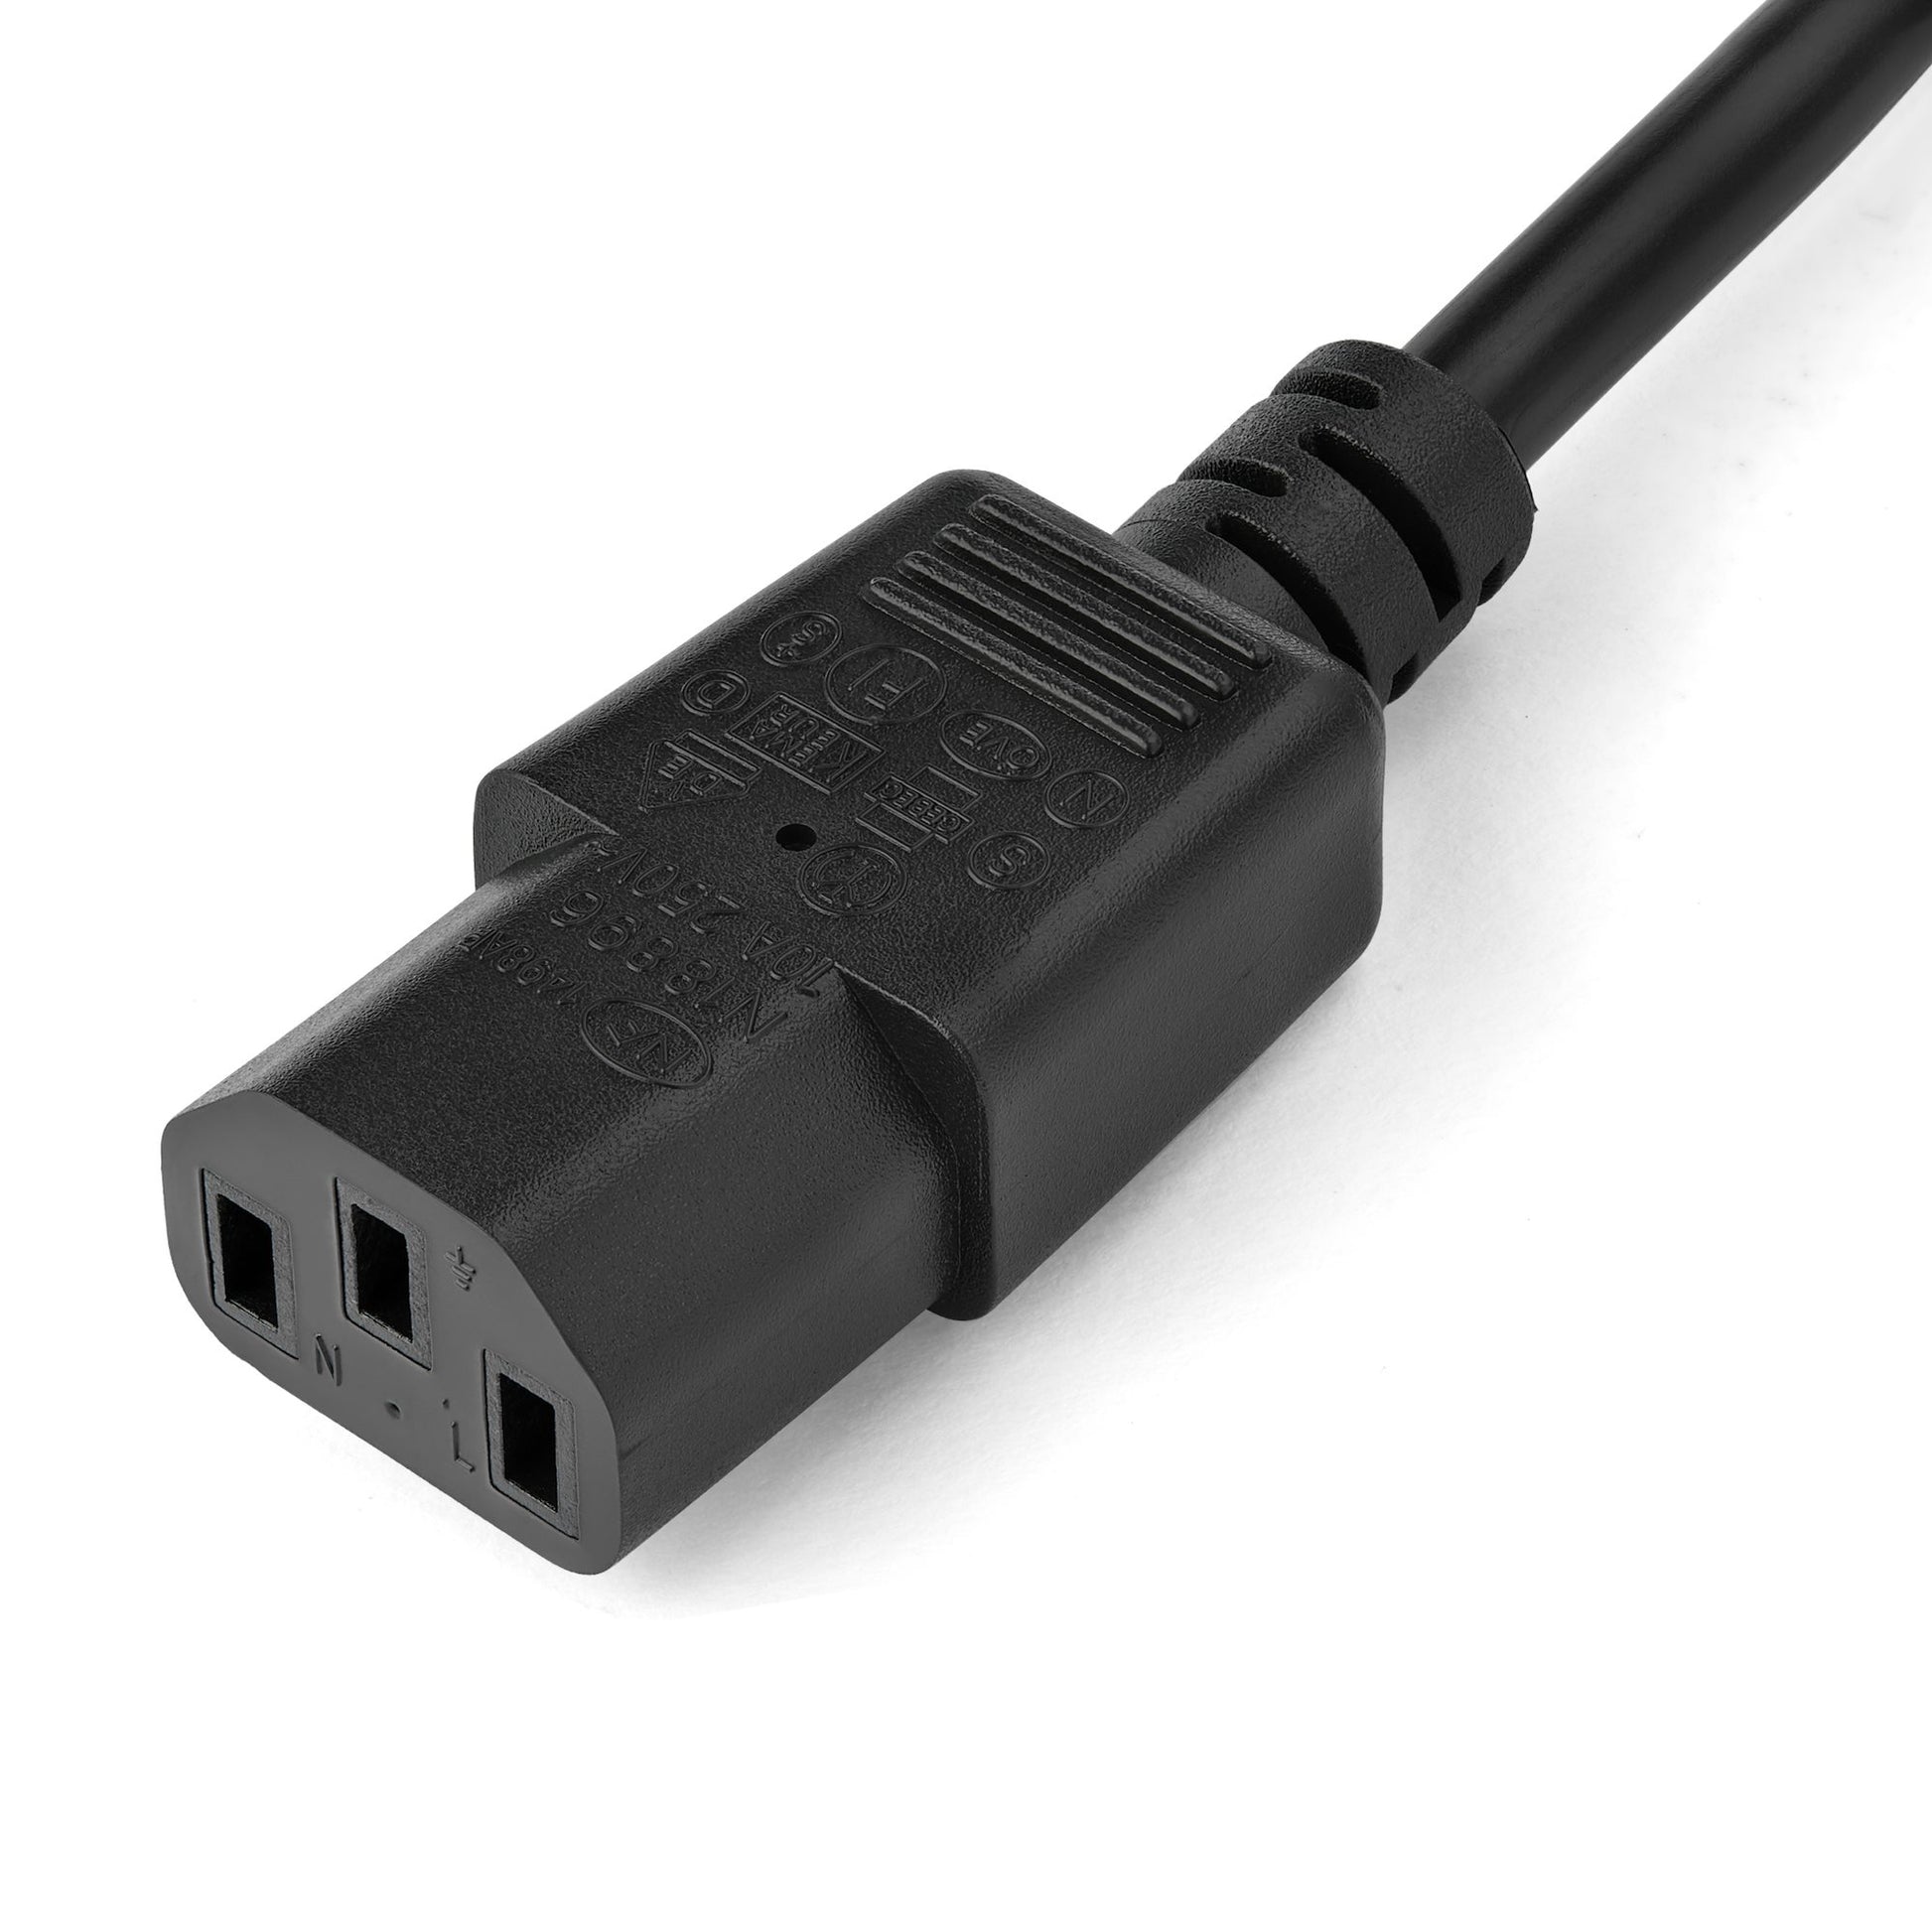 StarTech.com Power Supply Cord - AS/NZS 3112 to C13 - 2 m (6 ft.)-1